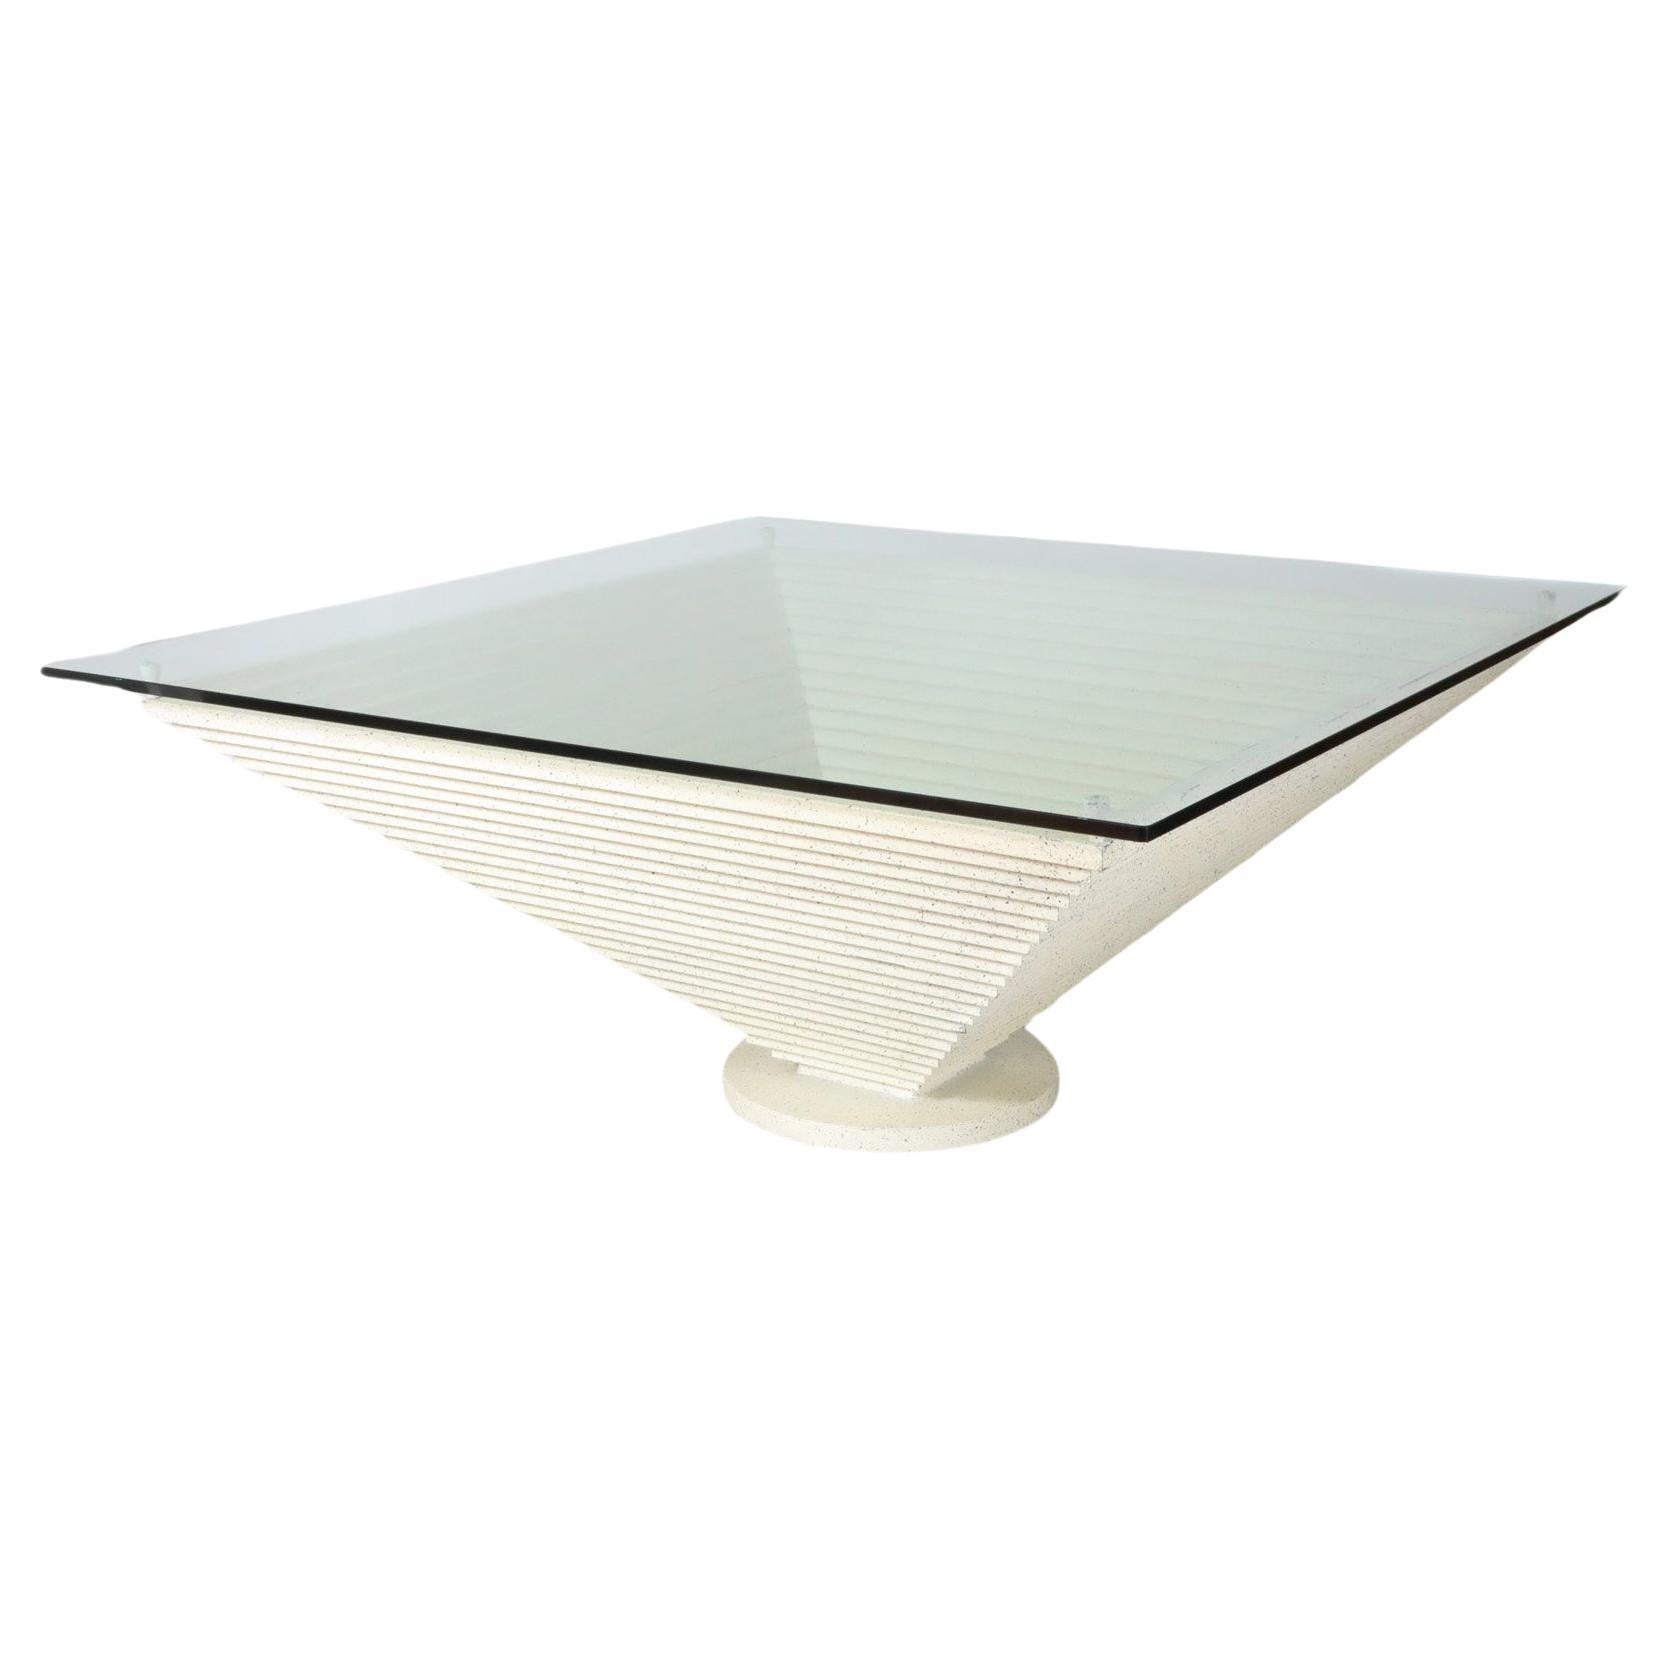 Giant Modernist Memphis Speckled Cream & Black Pyramid Table w/ Glass Top, 1980s For Sale